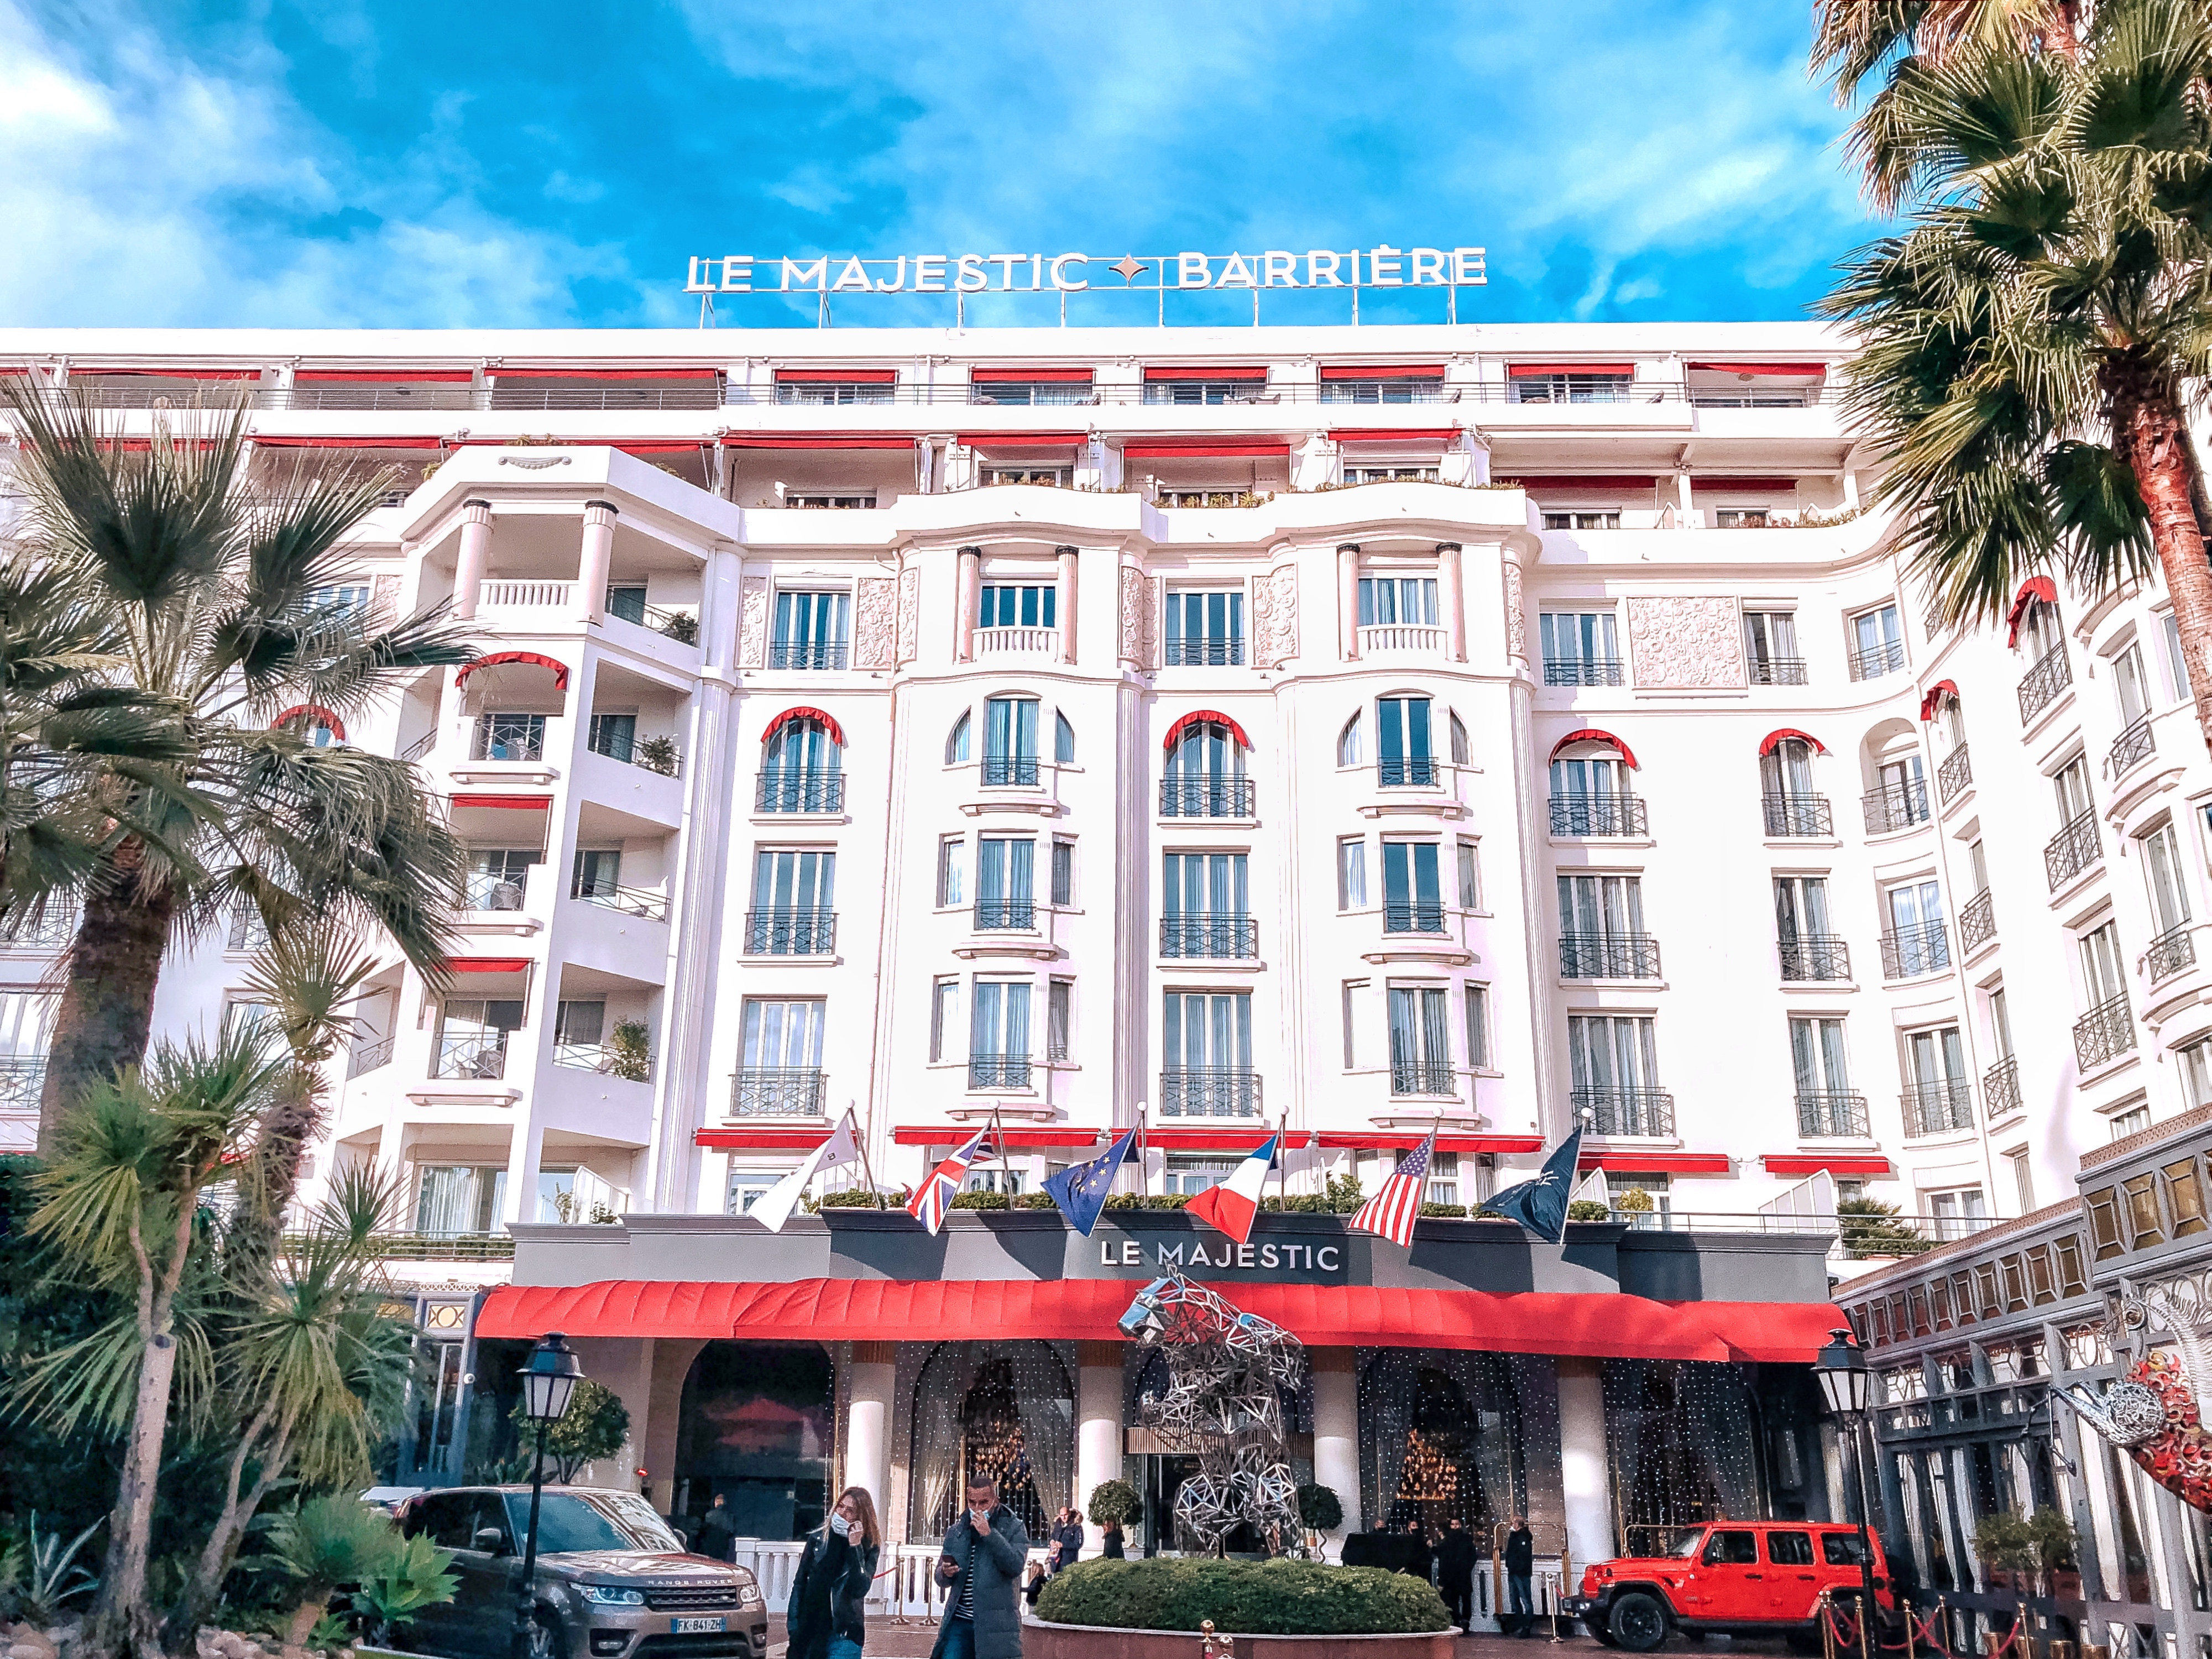 Hotel barriere le majestic